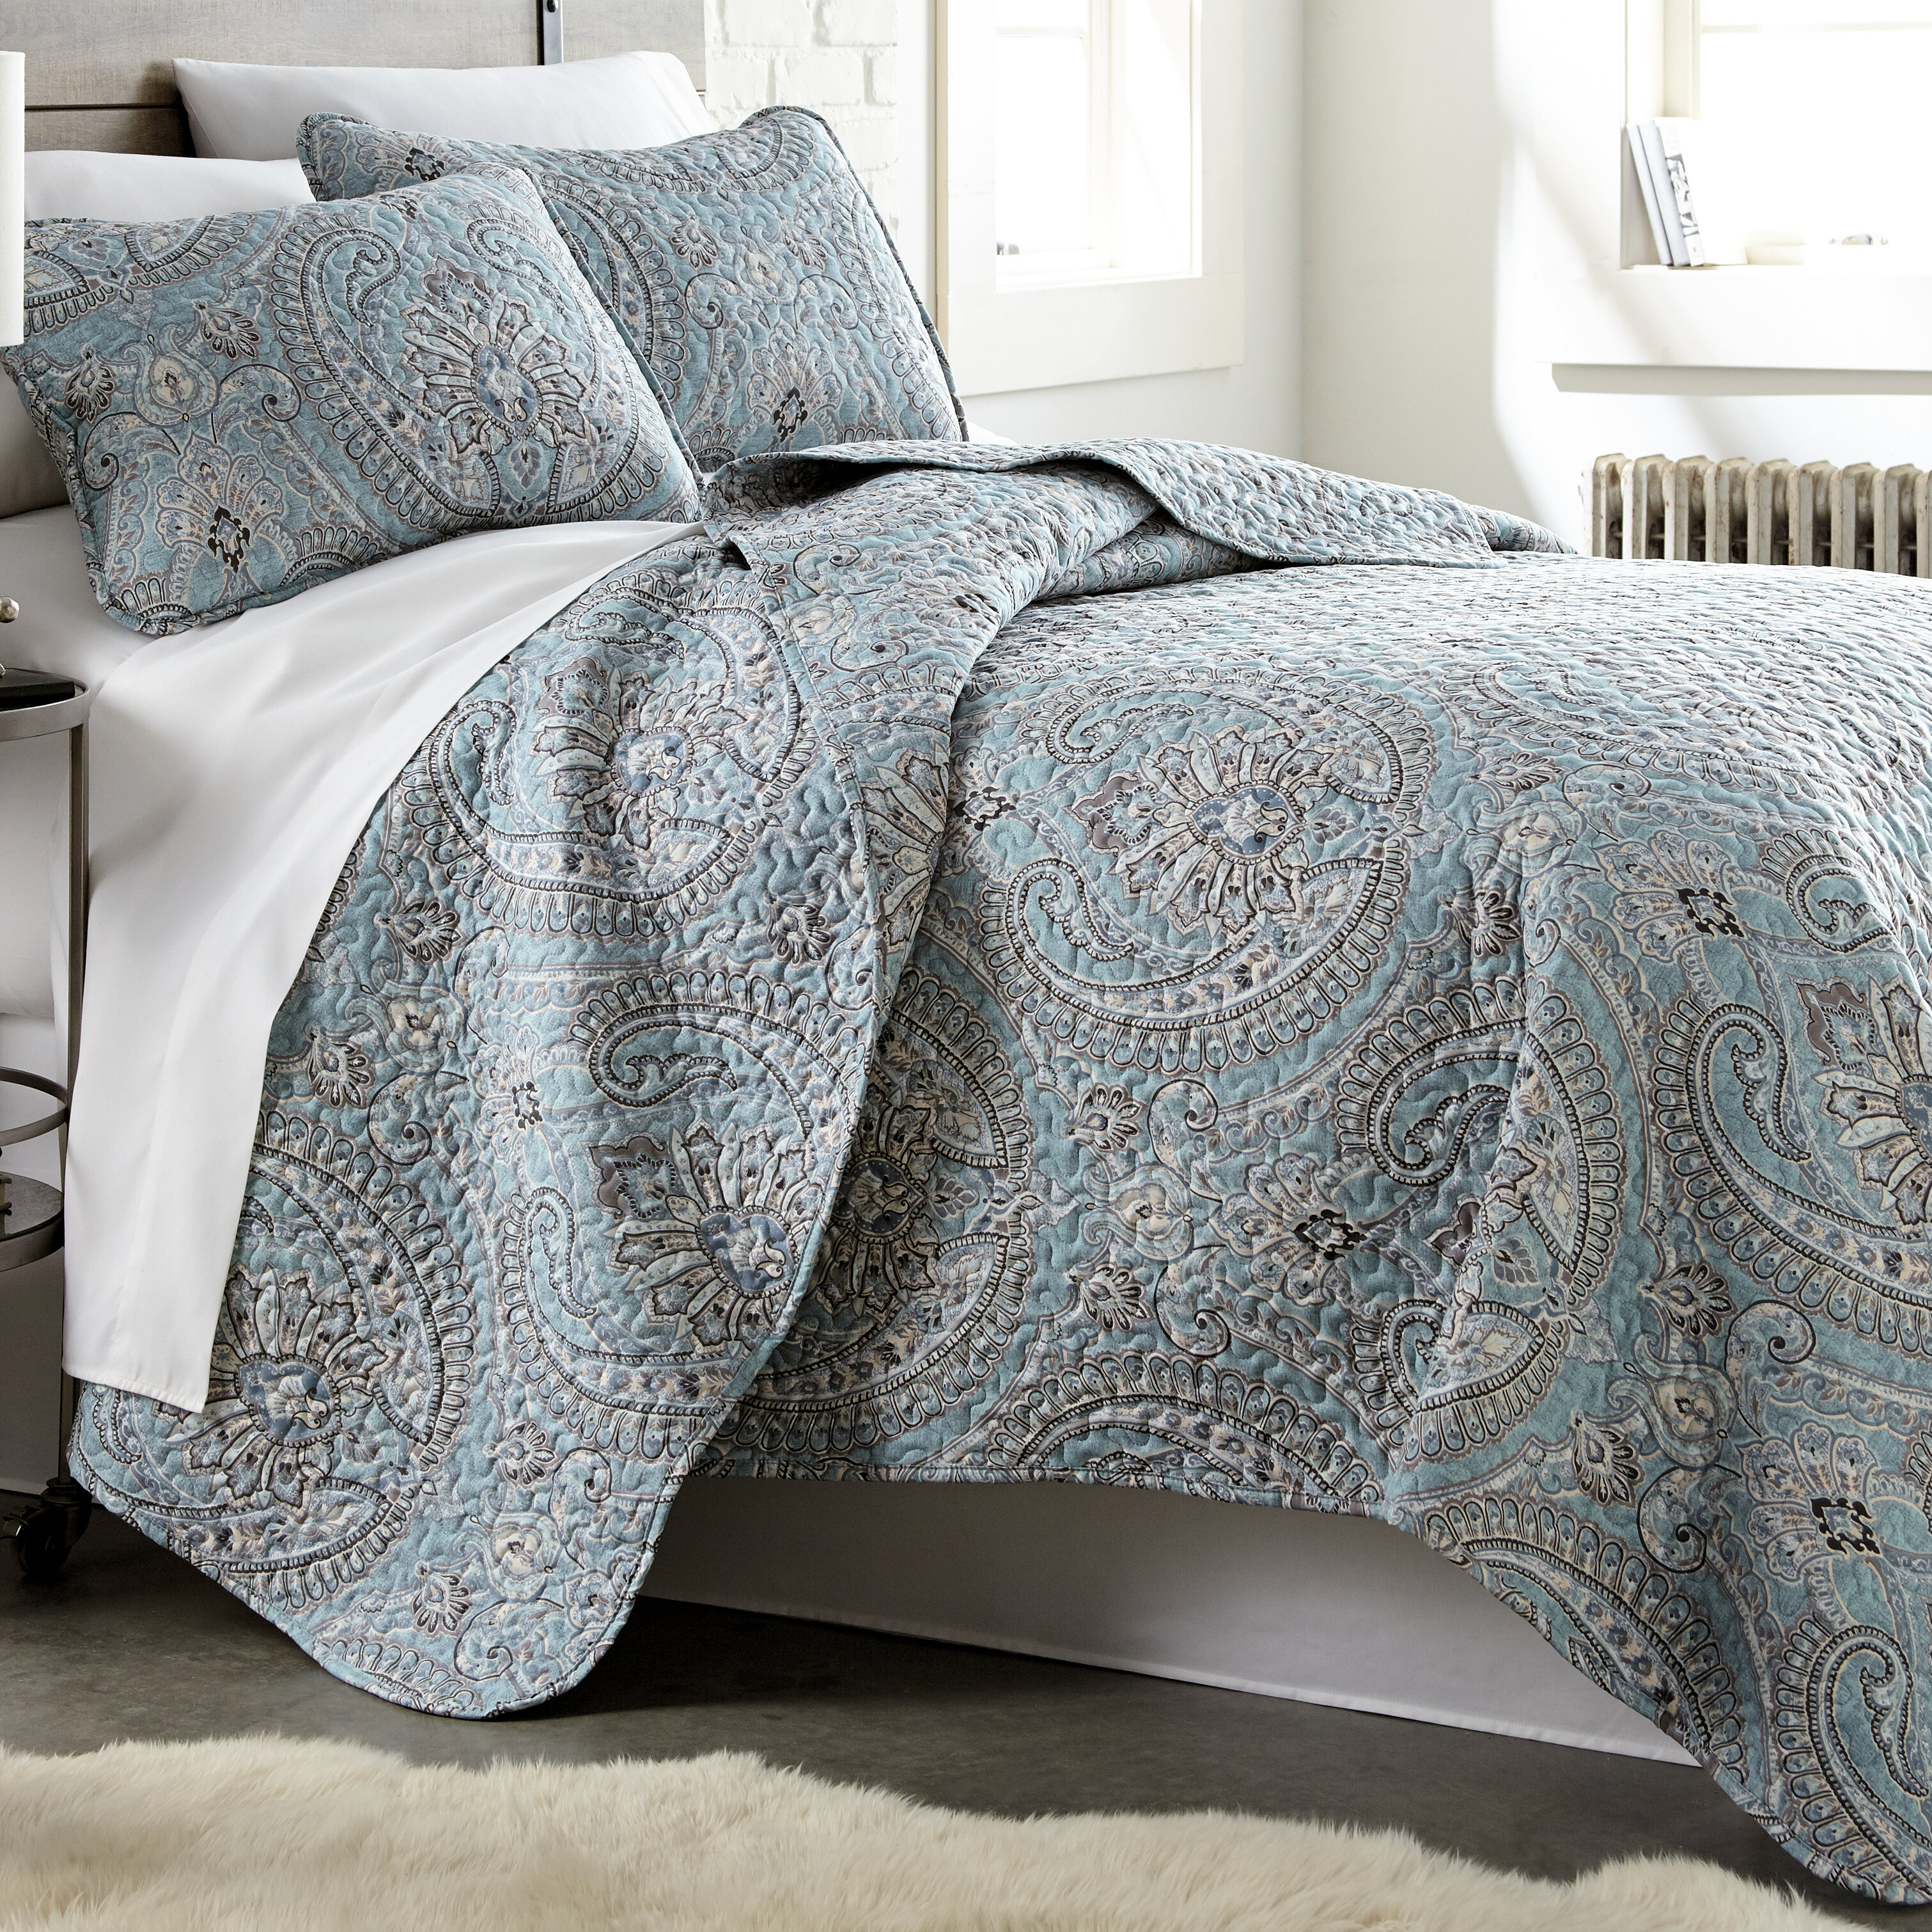 bed quilts on sale